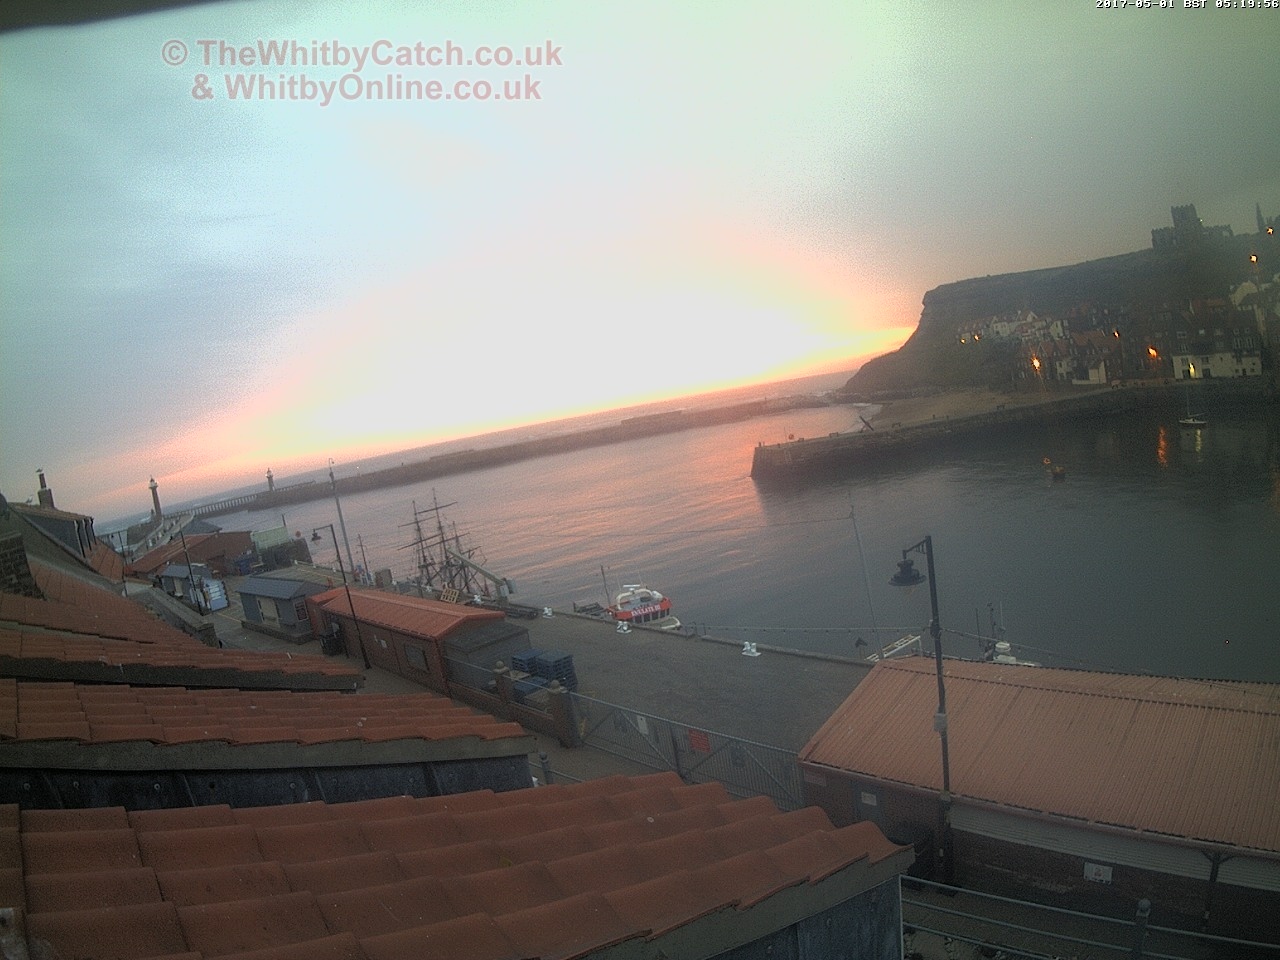 Whitby Mon 1st May 2017 05:20.